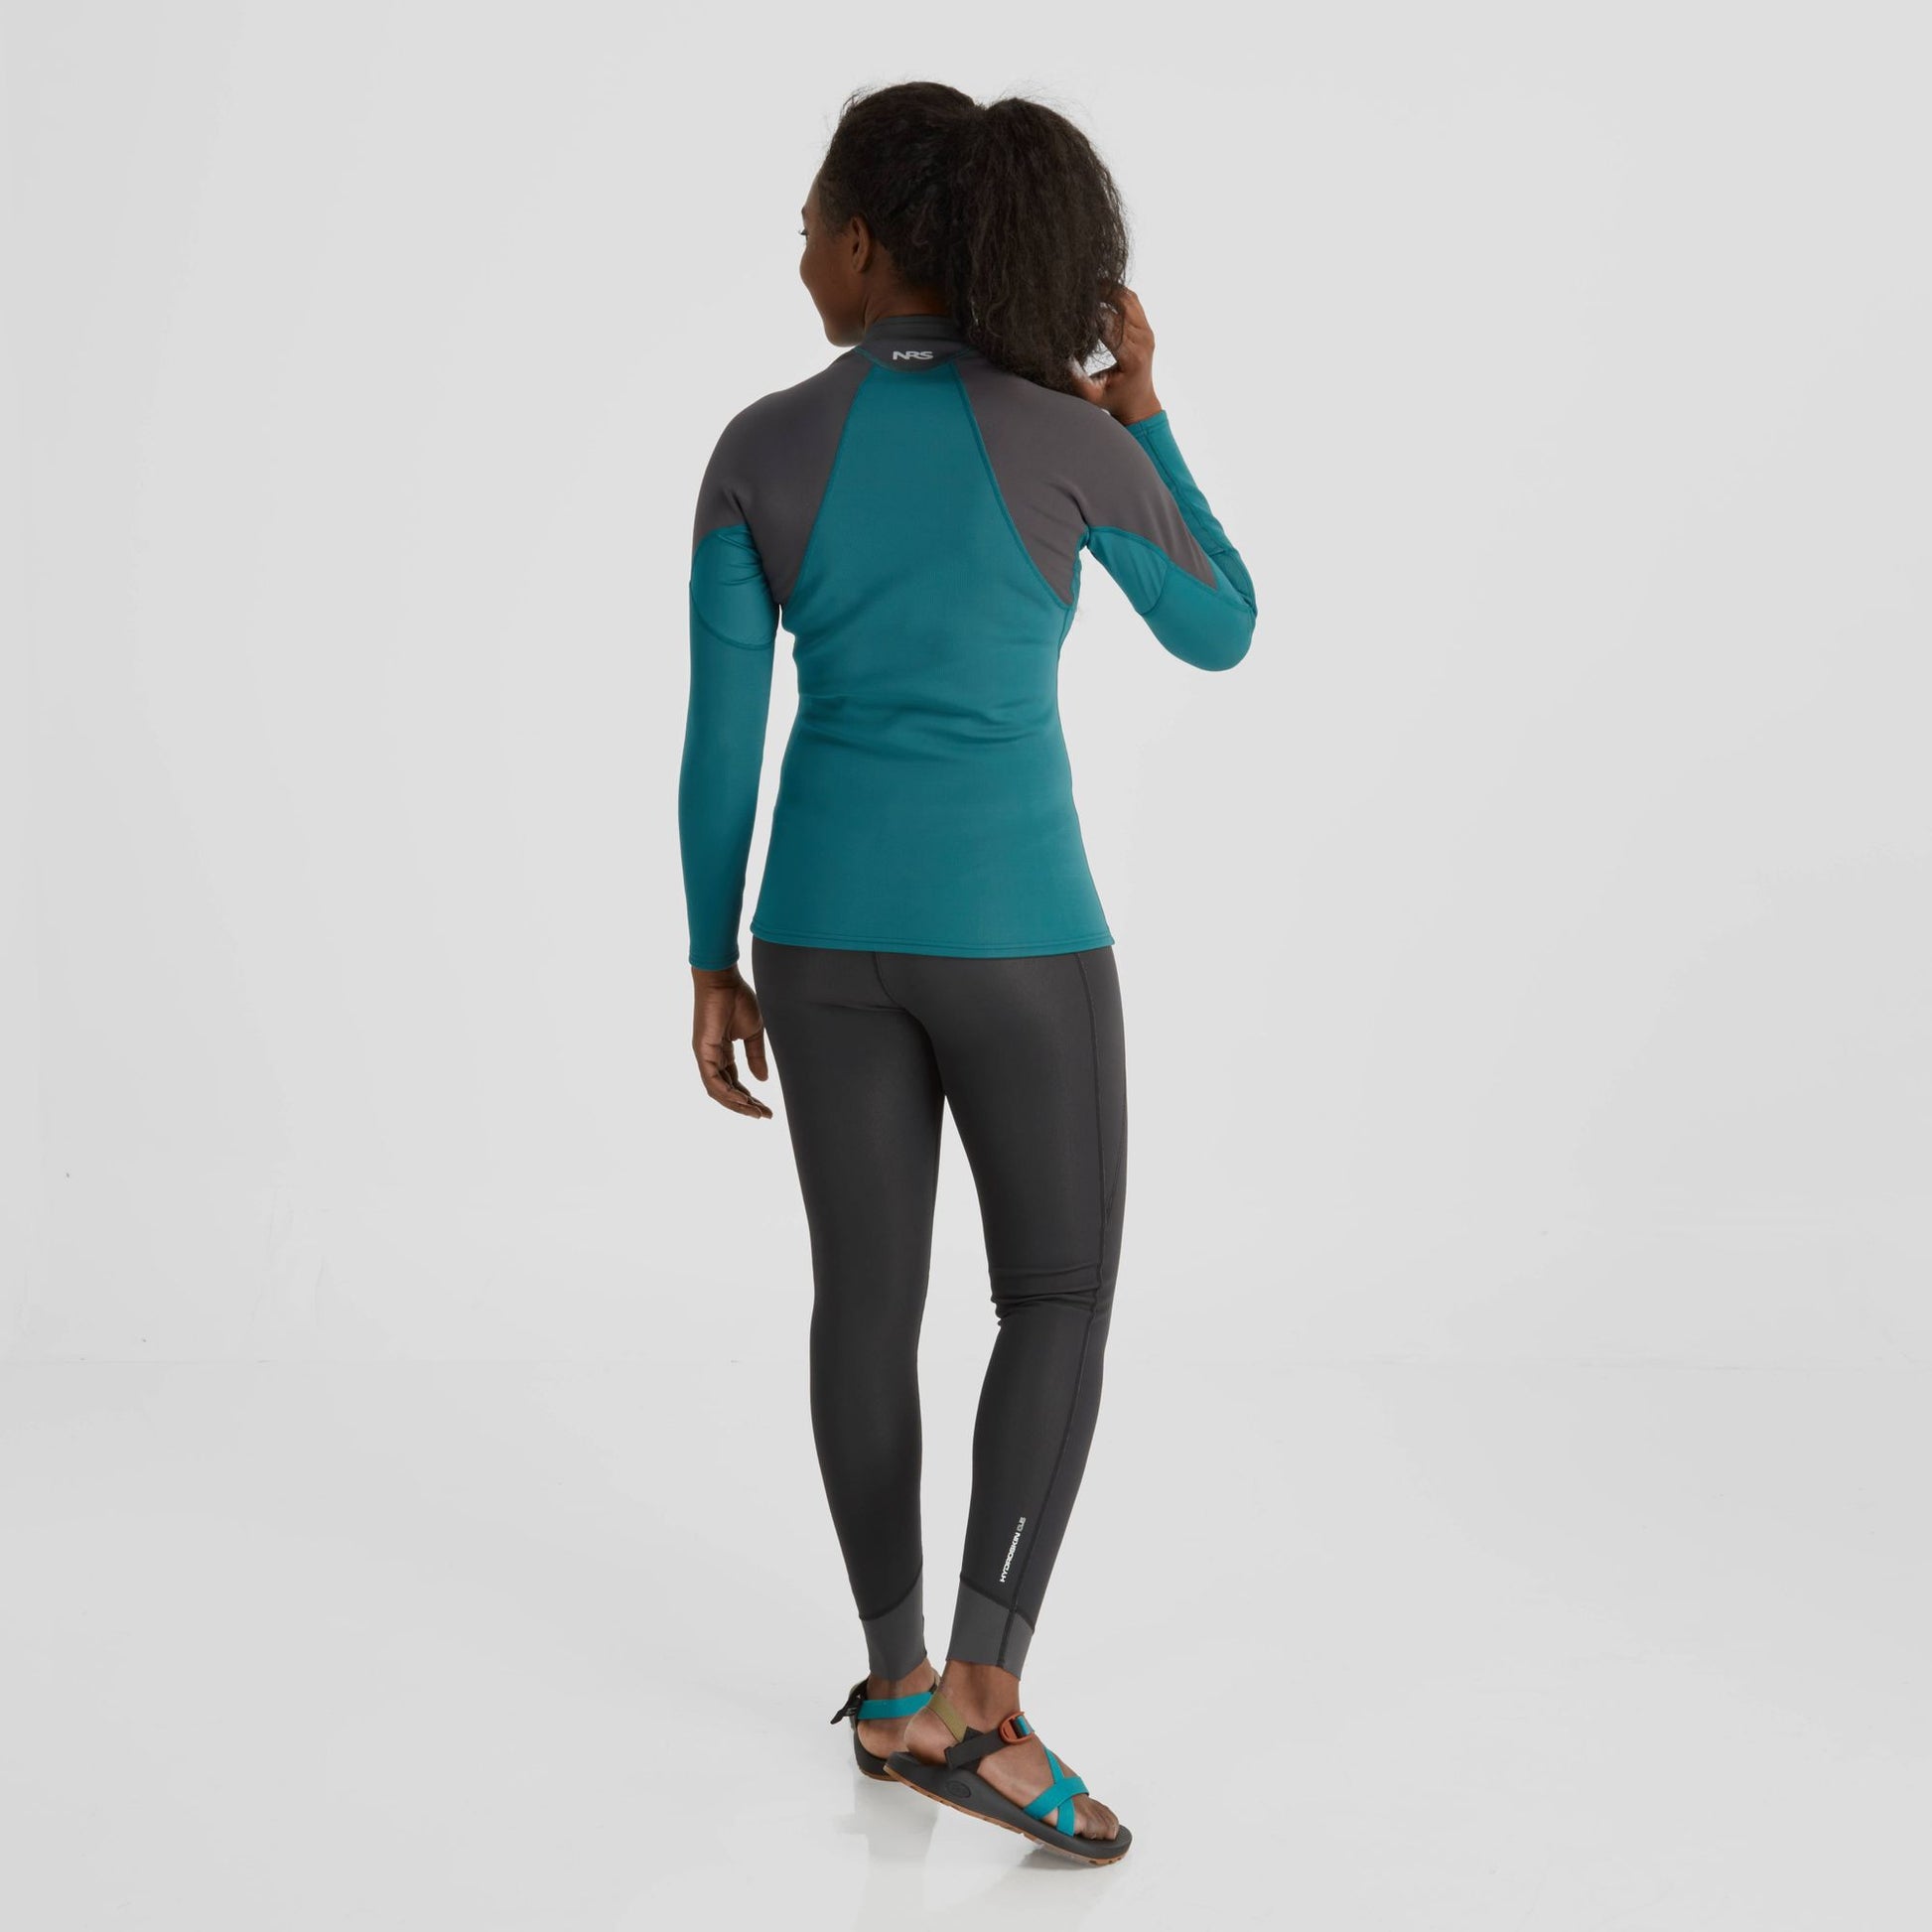 The back view of a woman wearing the NRS Hydroskin 0.5 Long Sleeve Shirt - Women's, an insulating top, and leggings.